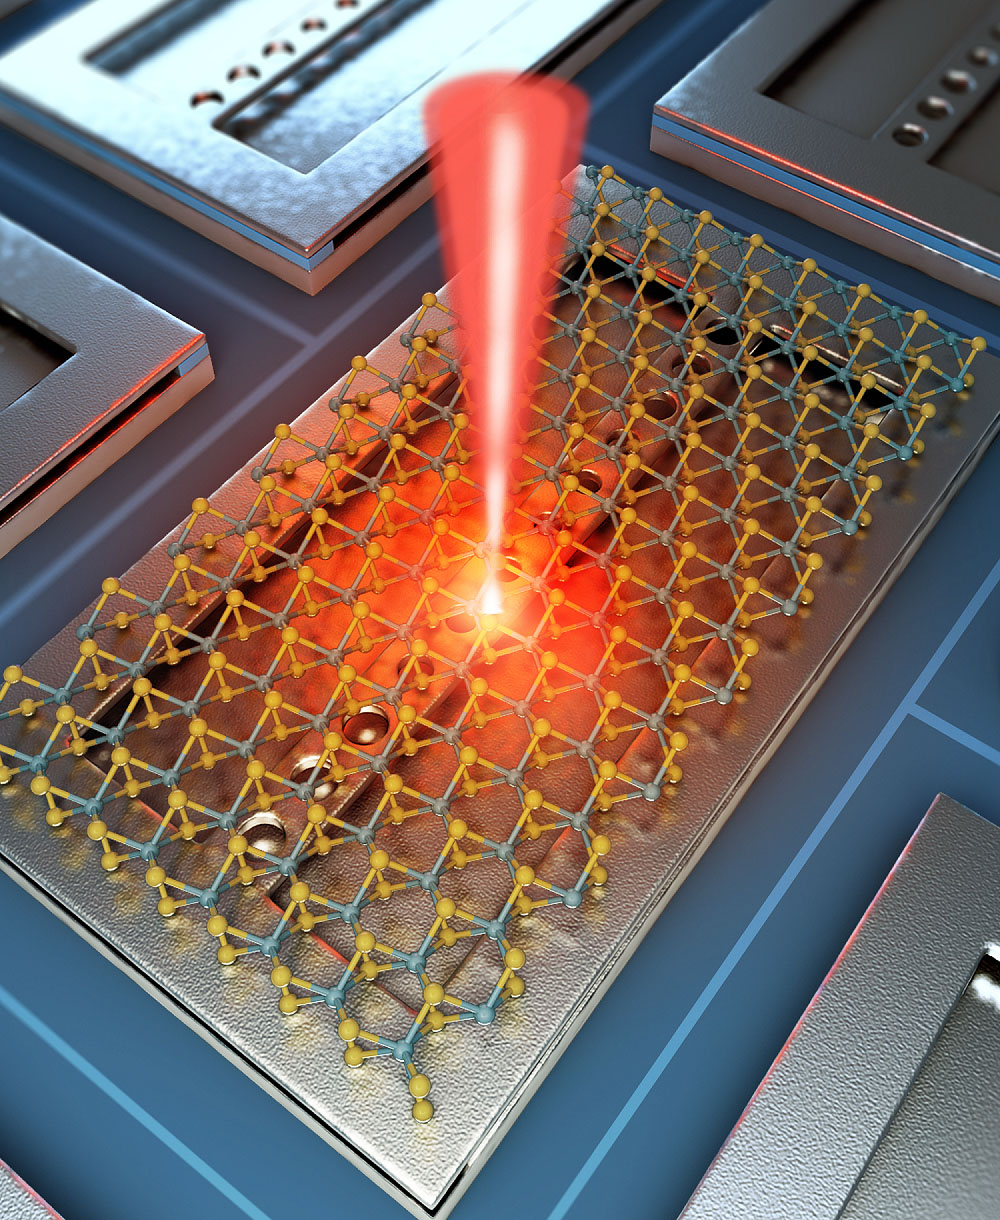 Single molecular layer and thin silicon beam enable nanolaser operation at room temperature